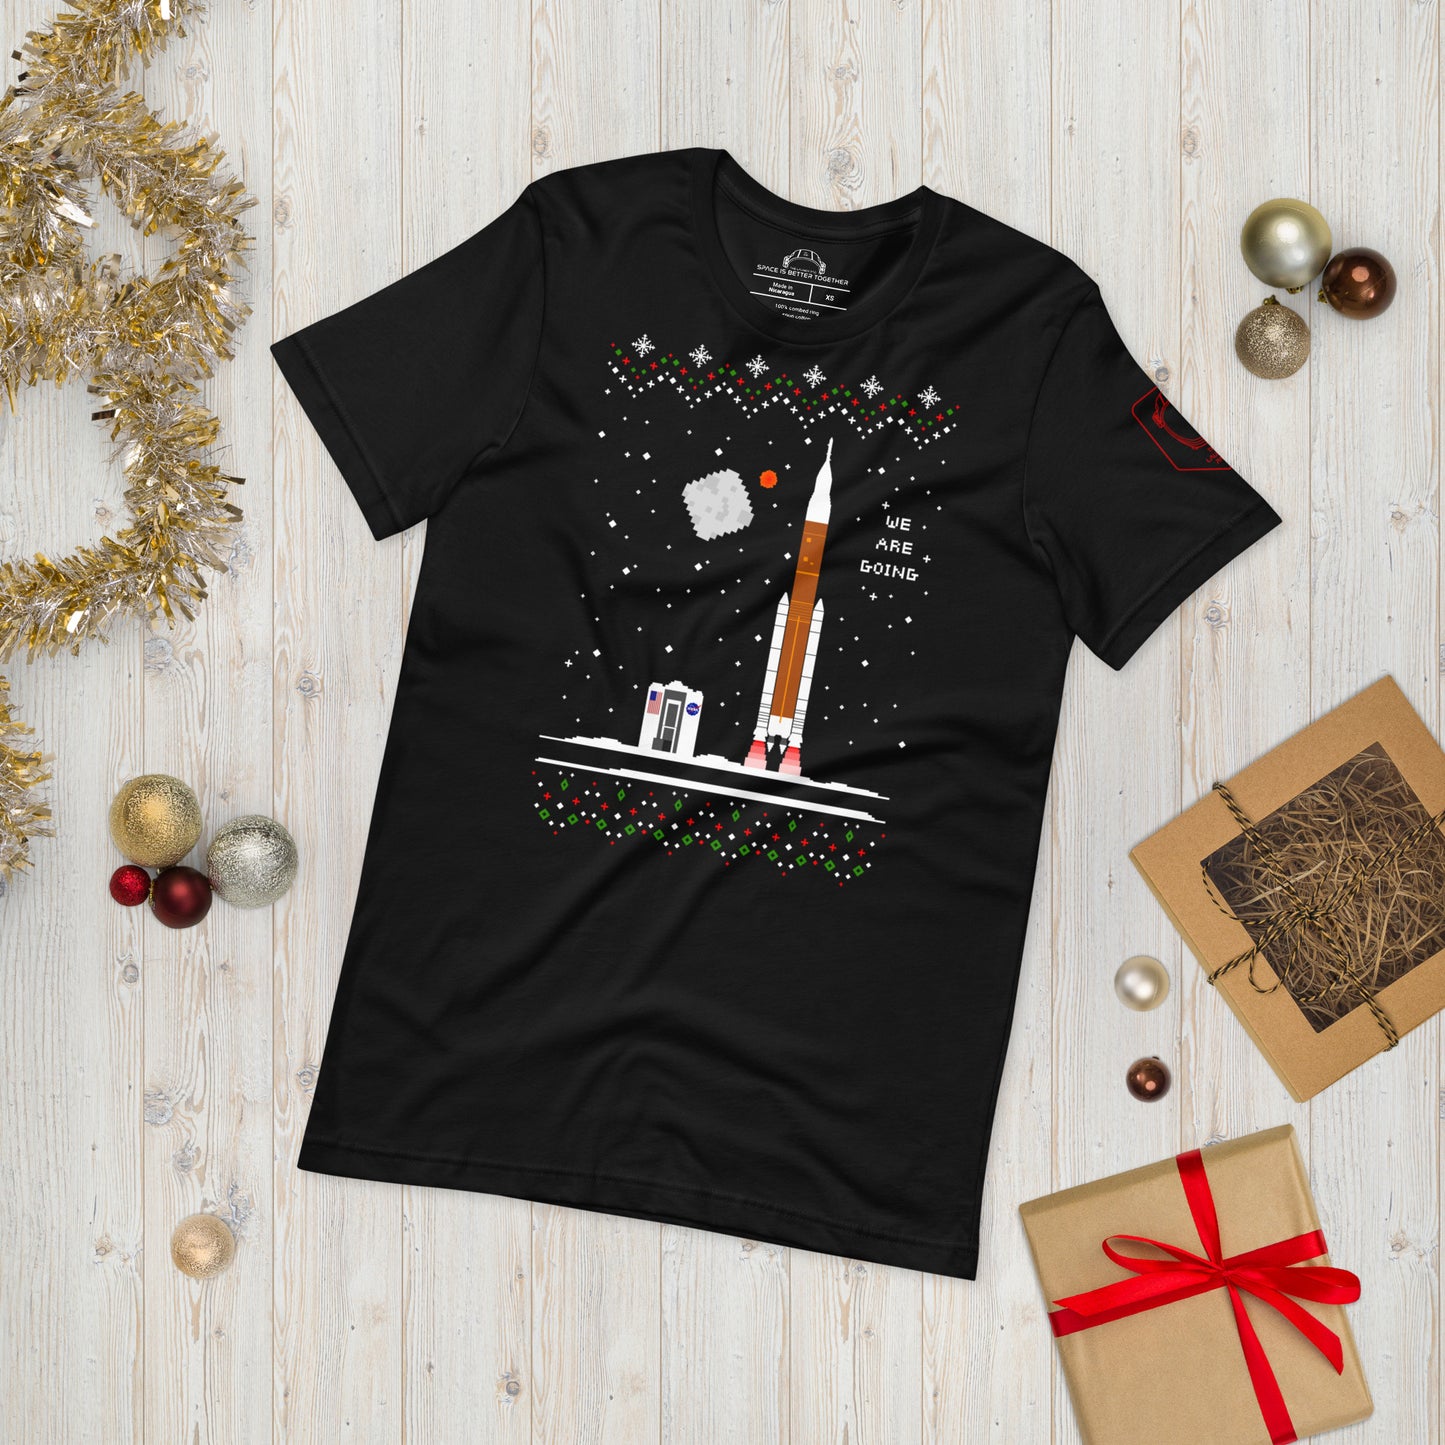 We Are Going Ugly Space Tee (Limited Edition)